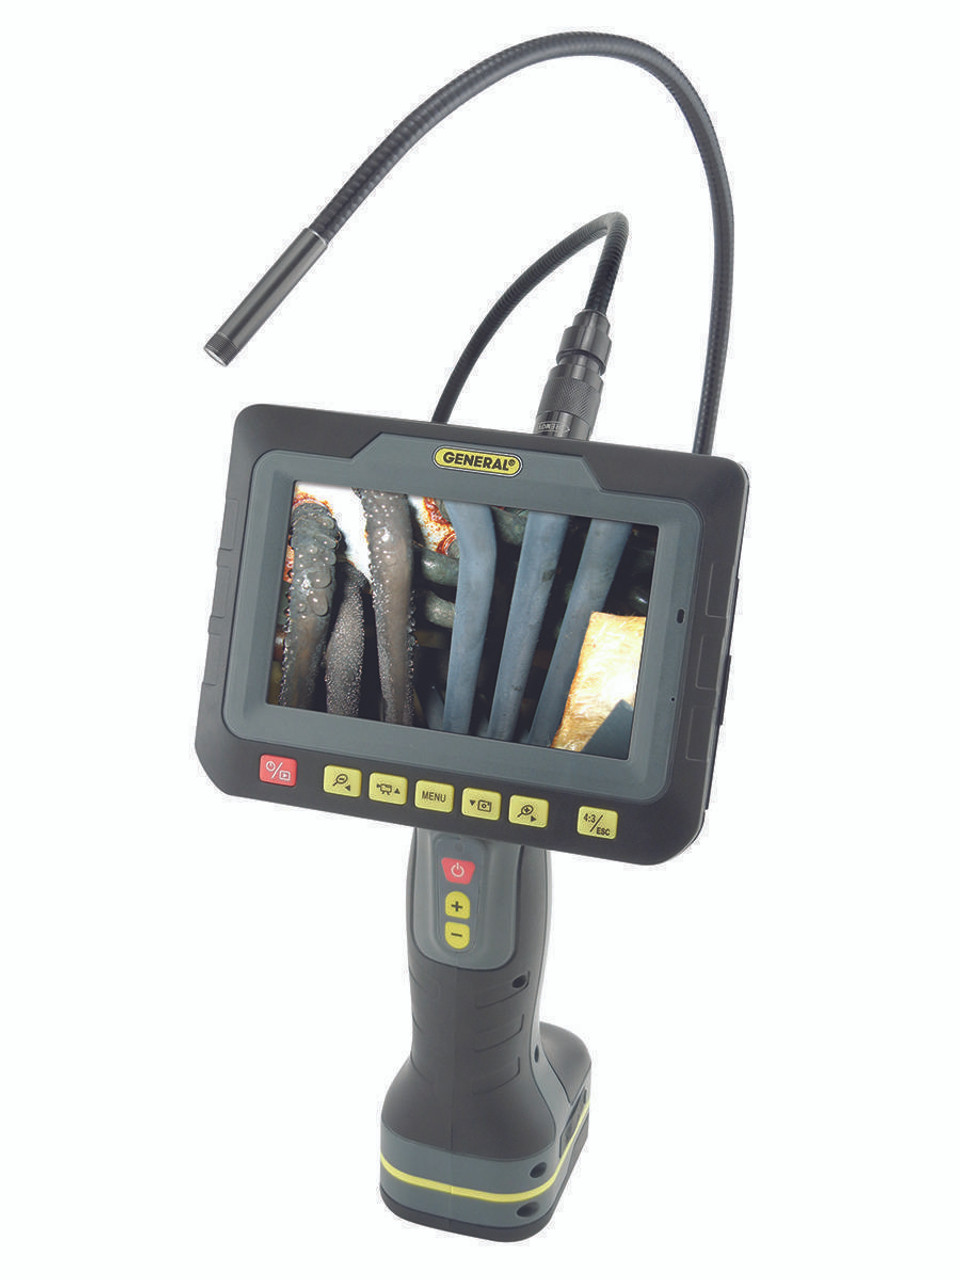 General Wireless Recording Video Inspection Camera/Borescope with 5 In. Screen and 9mm Probe DCS500